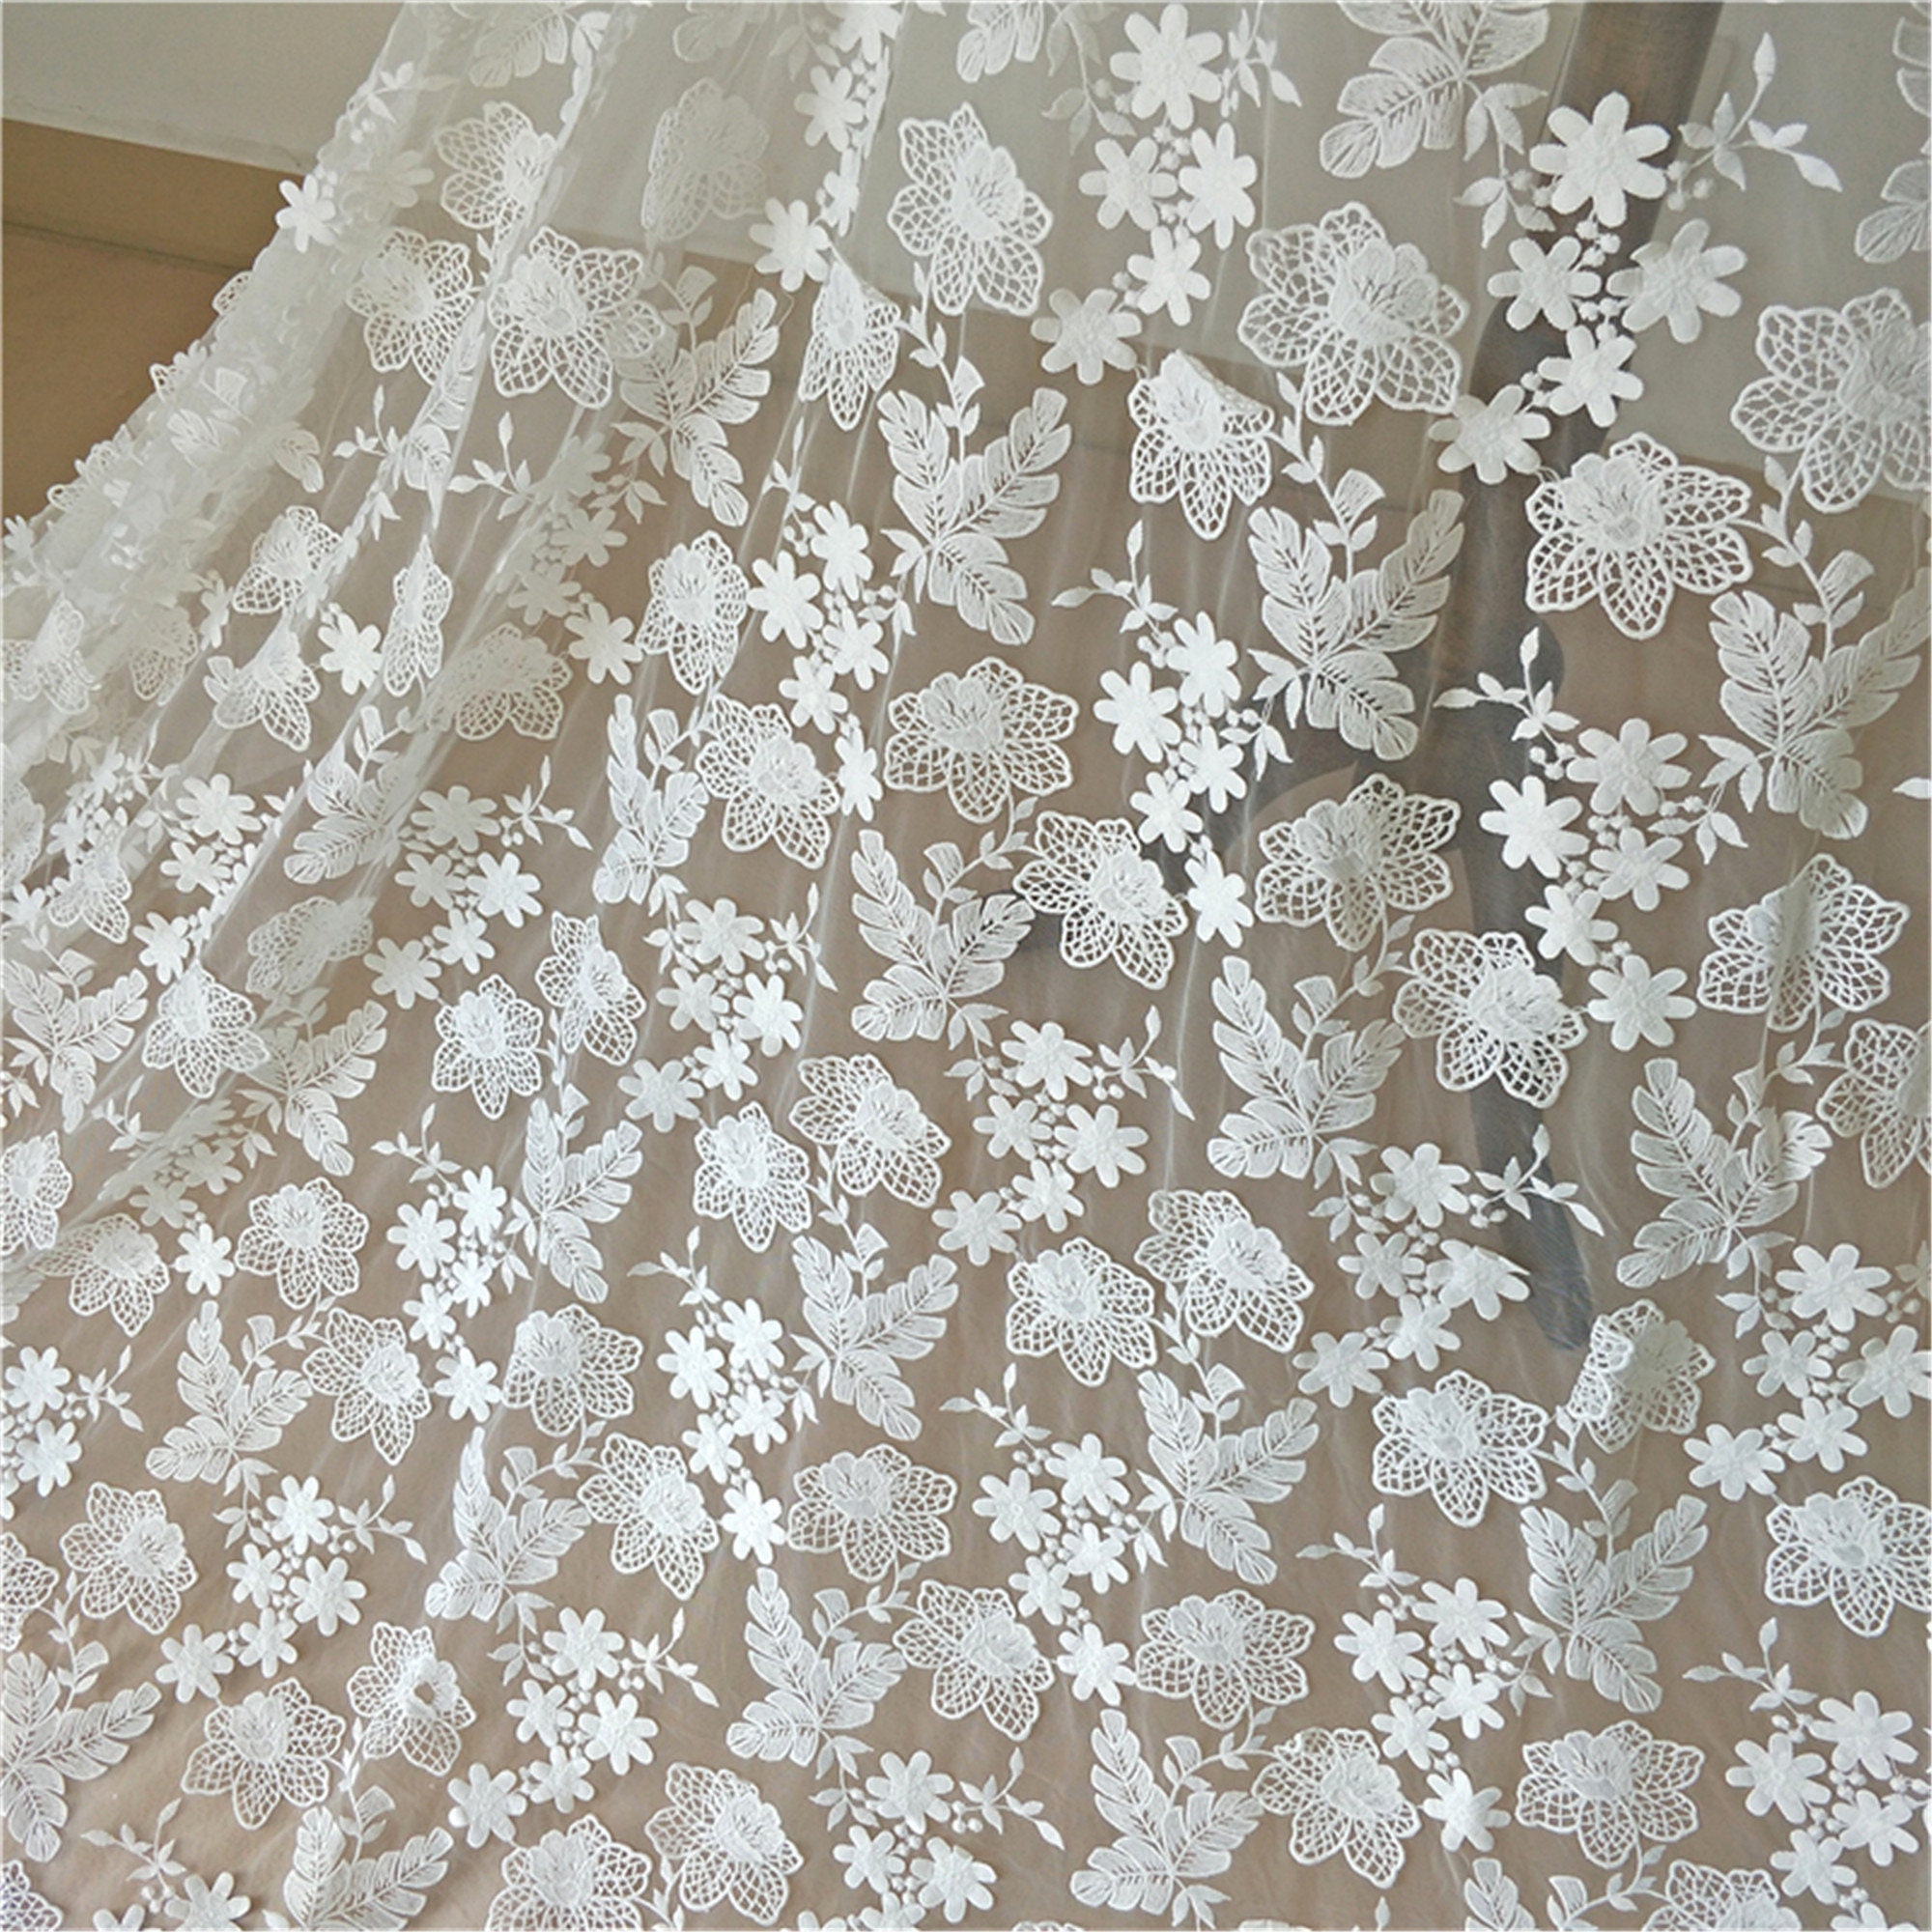 Elegant Ivory 3D Flower Embroidered Lace Fabric Cotton Wedding - Etsy